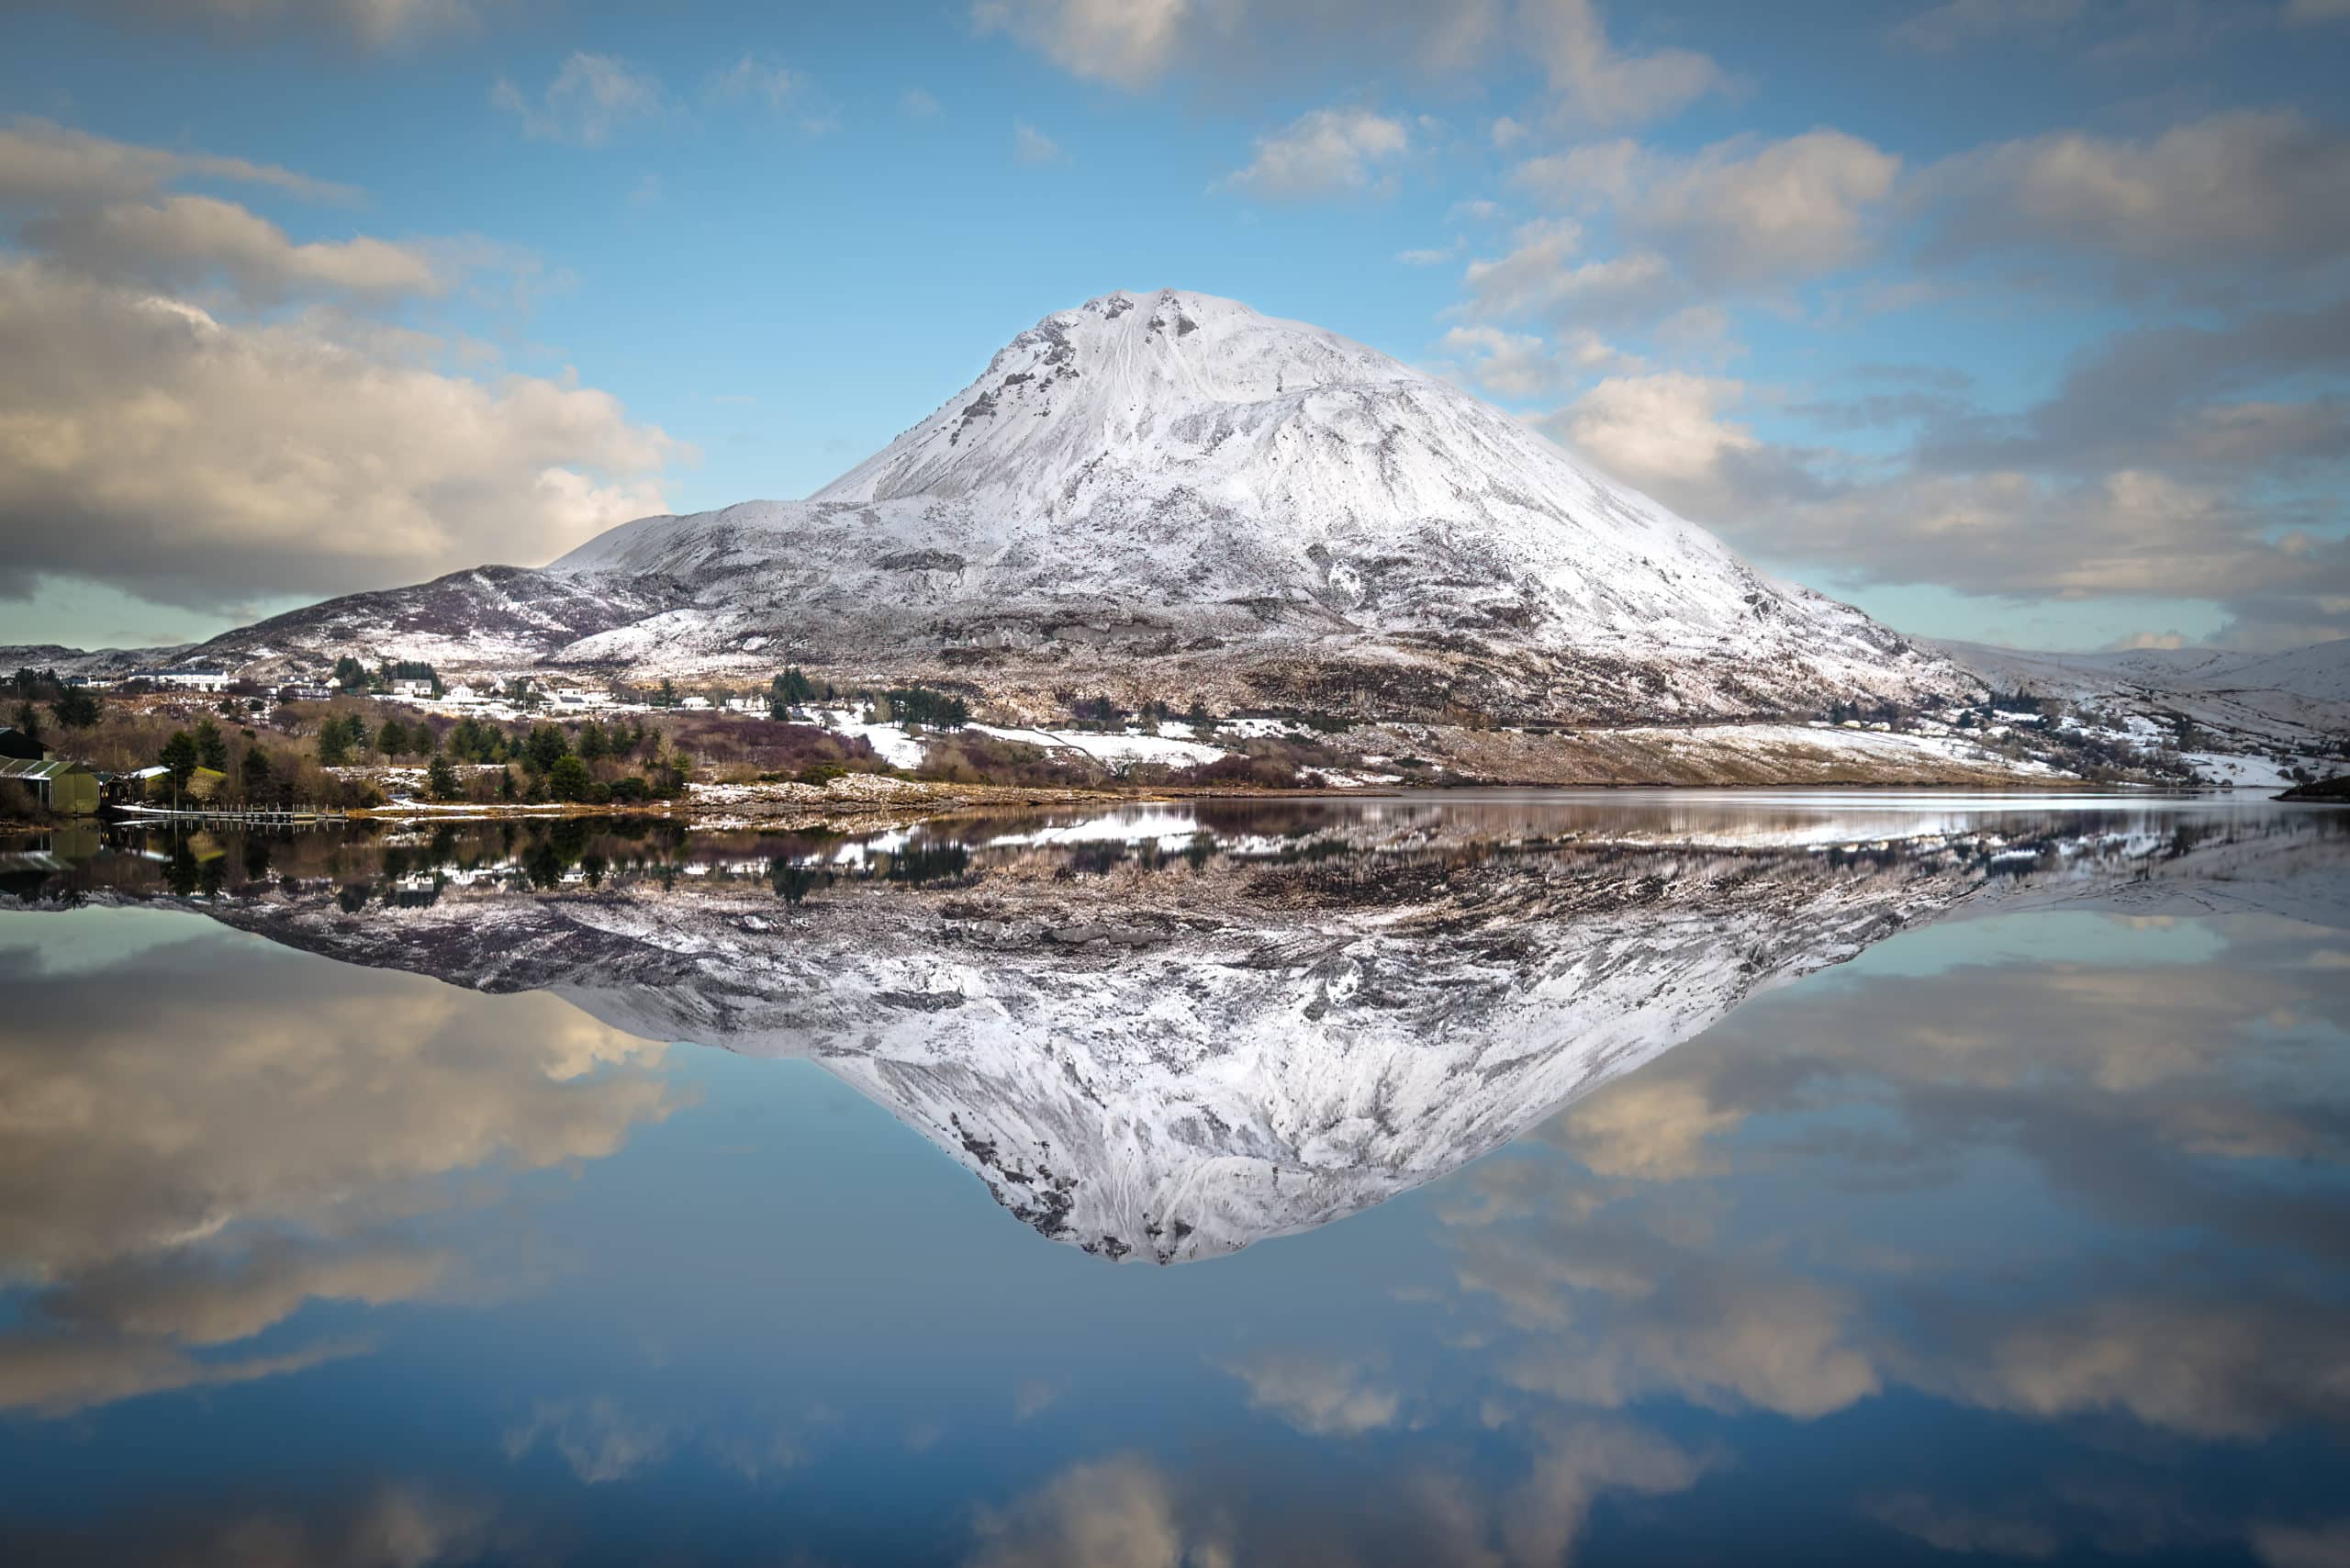 Reflections of snowy Errigal, Donegal, Ireland